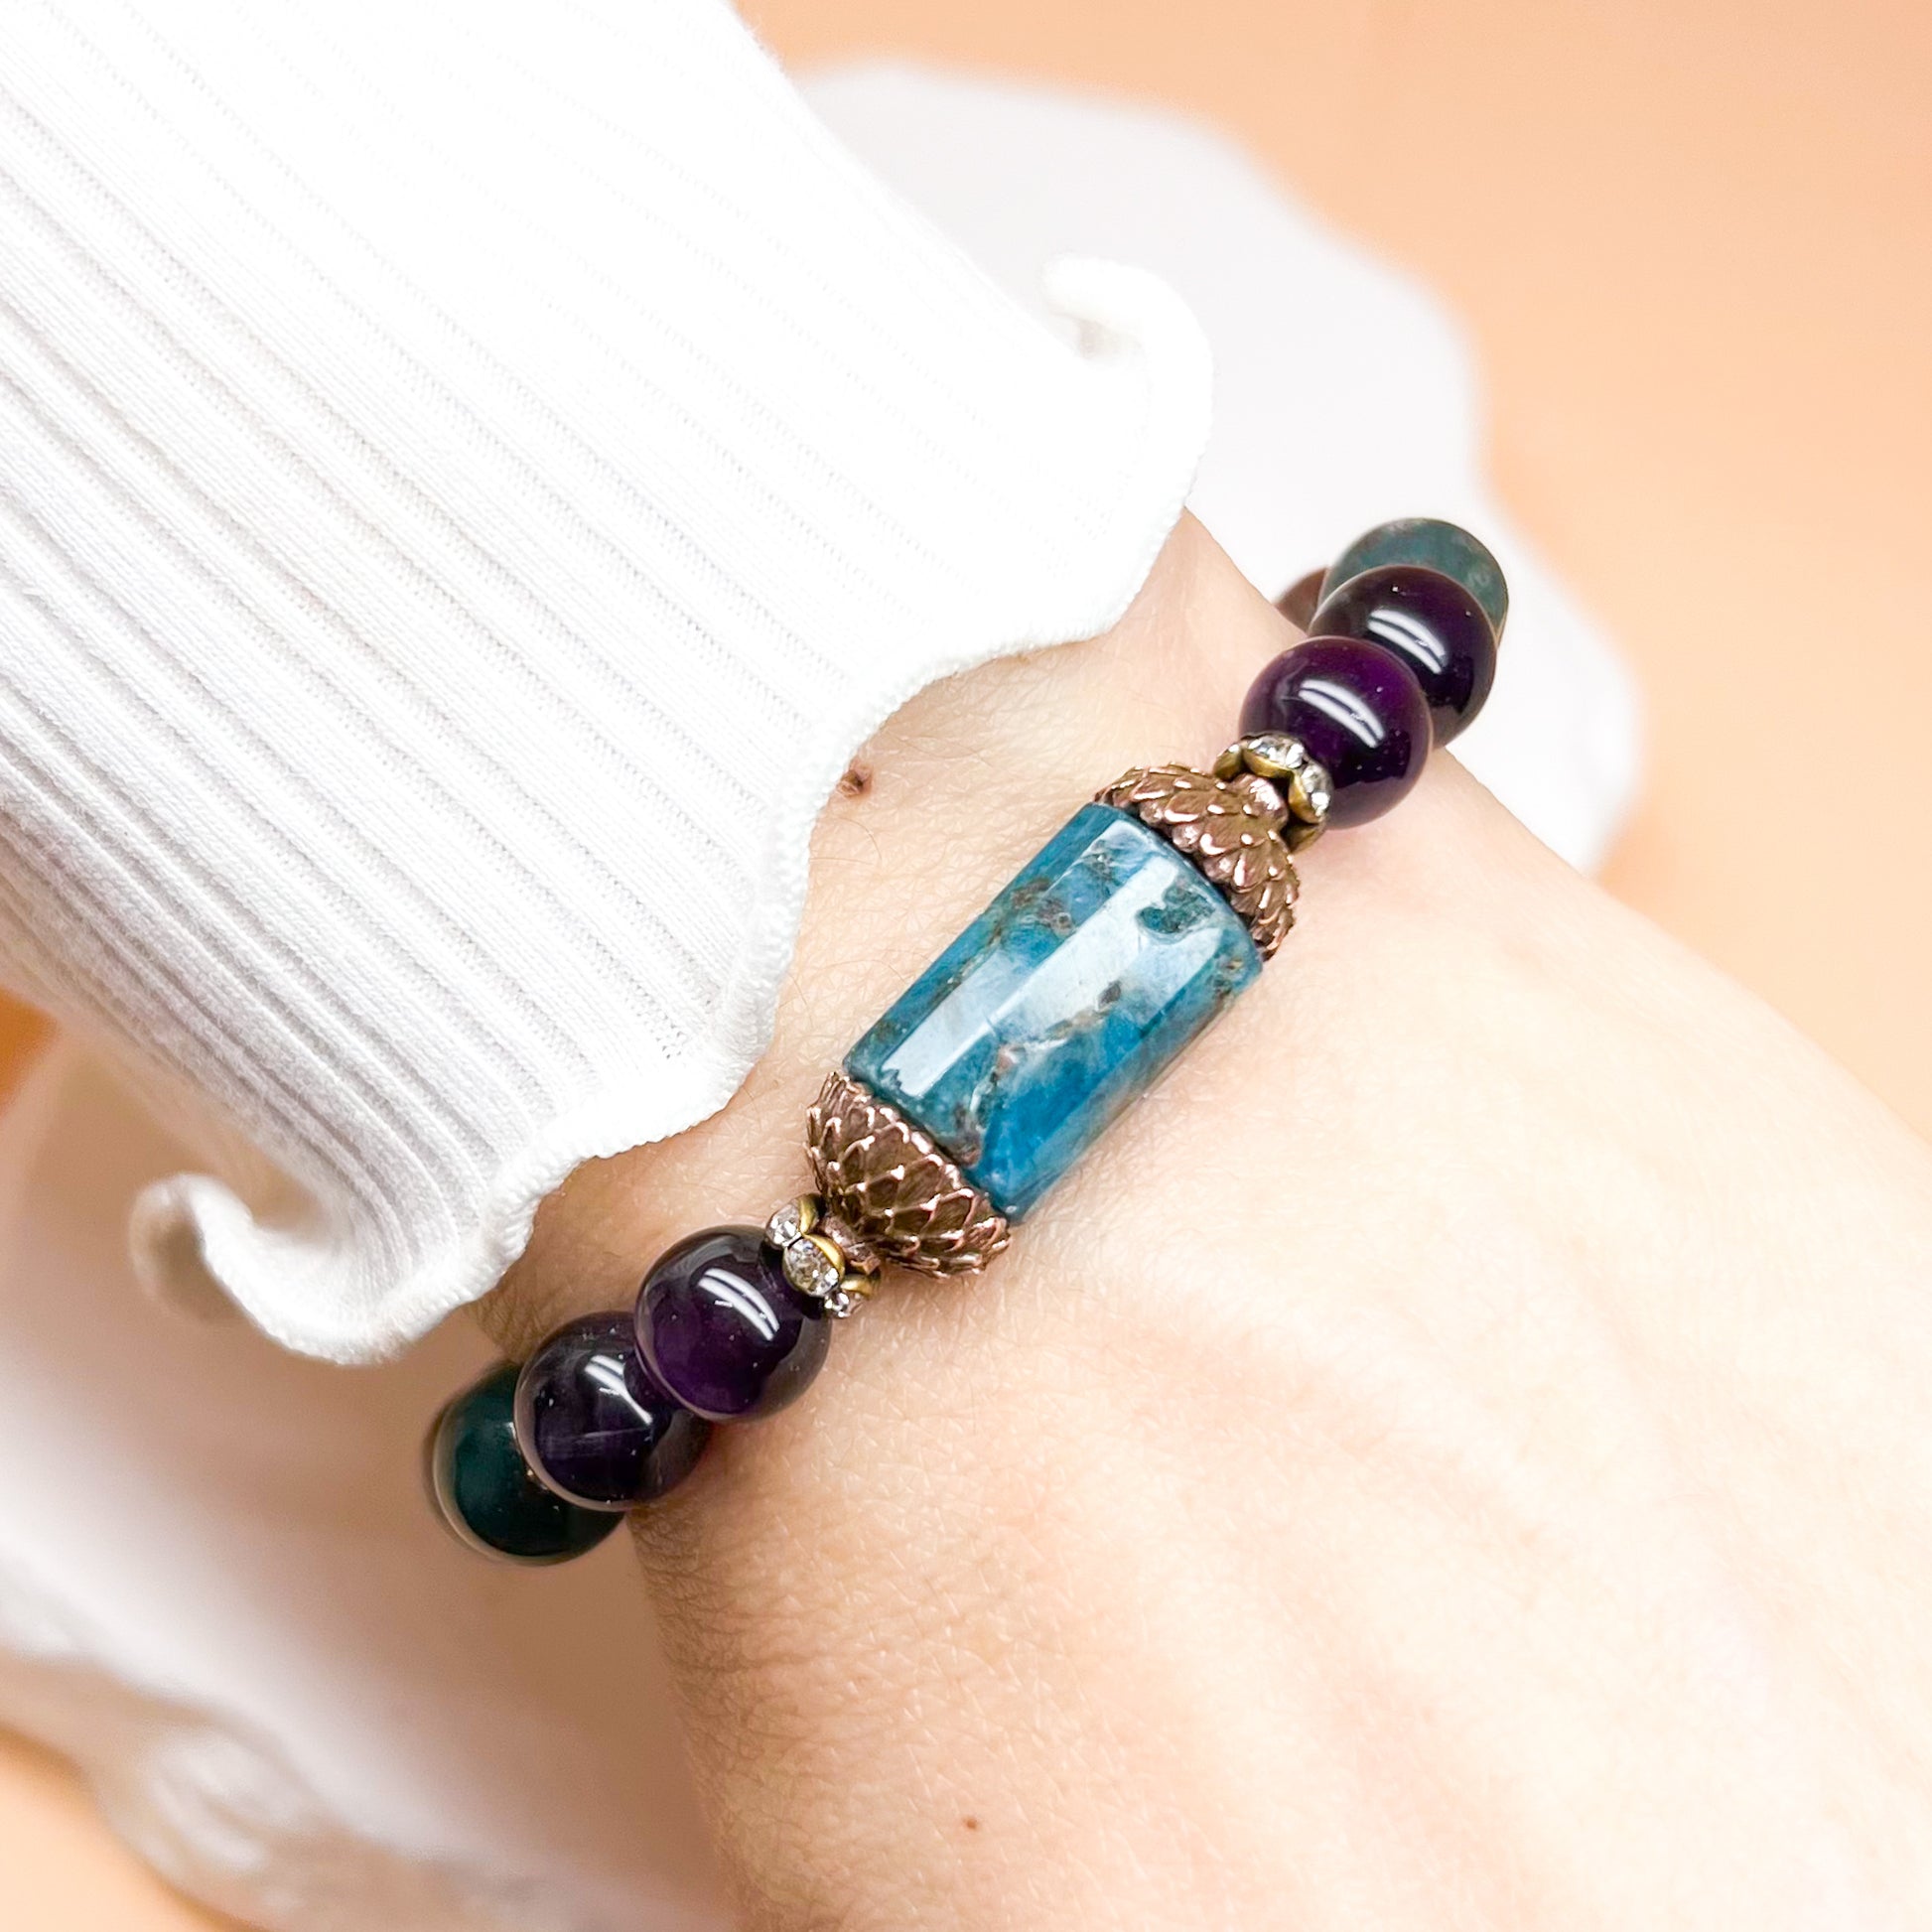 Apatite and amethyst lotus bracelet for luck and protection